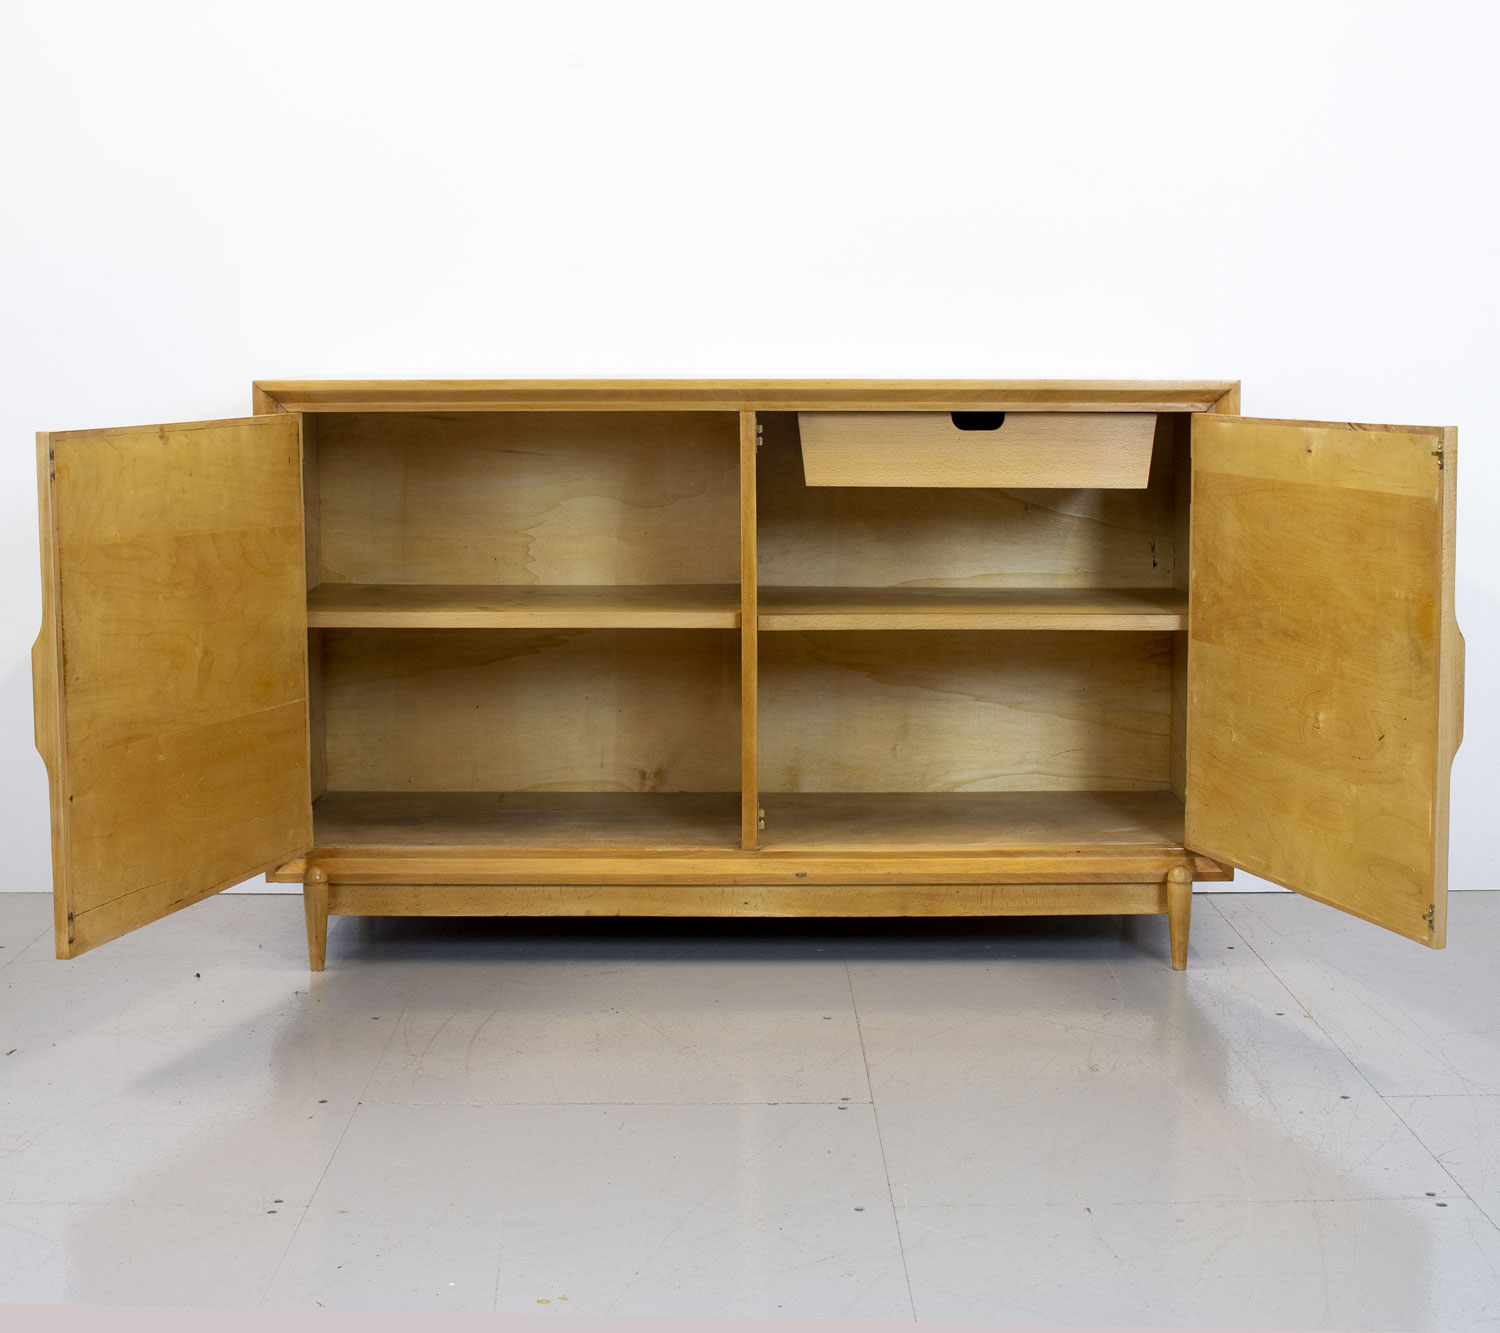 1950s Indian Laurel Sideboard by Kelvin McAvoy for Liberty’s